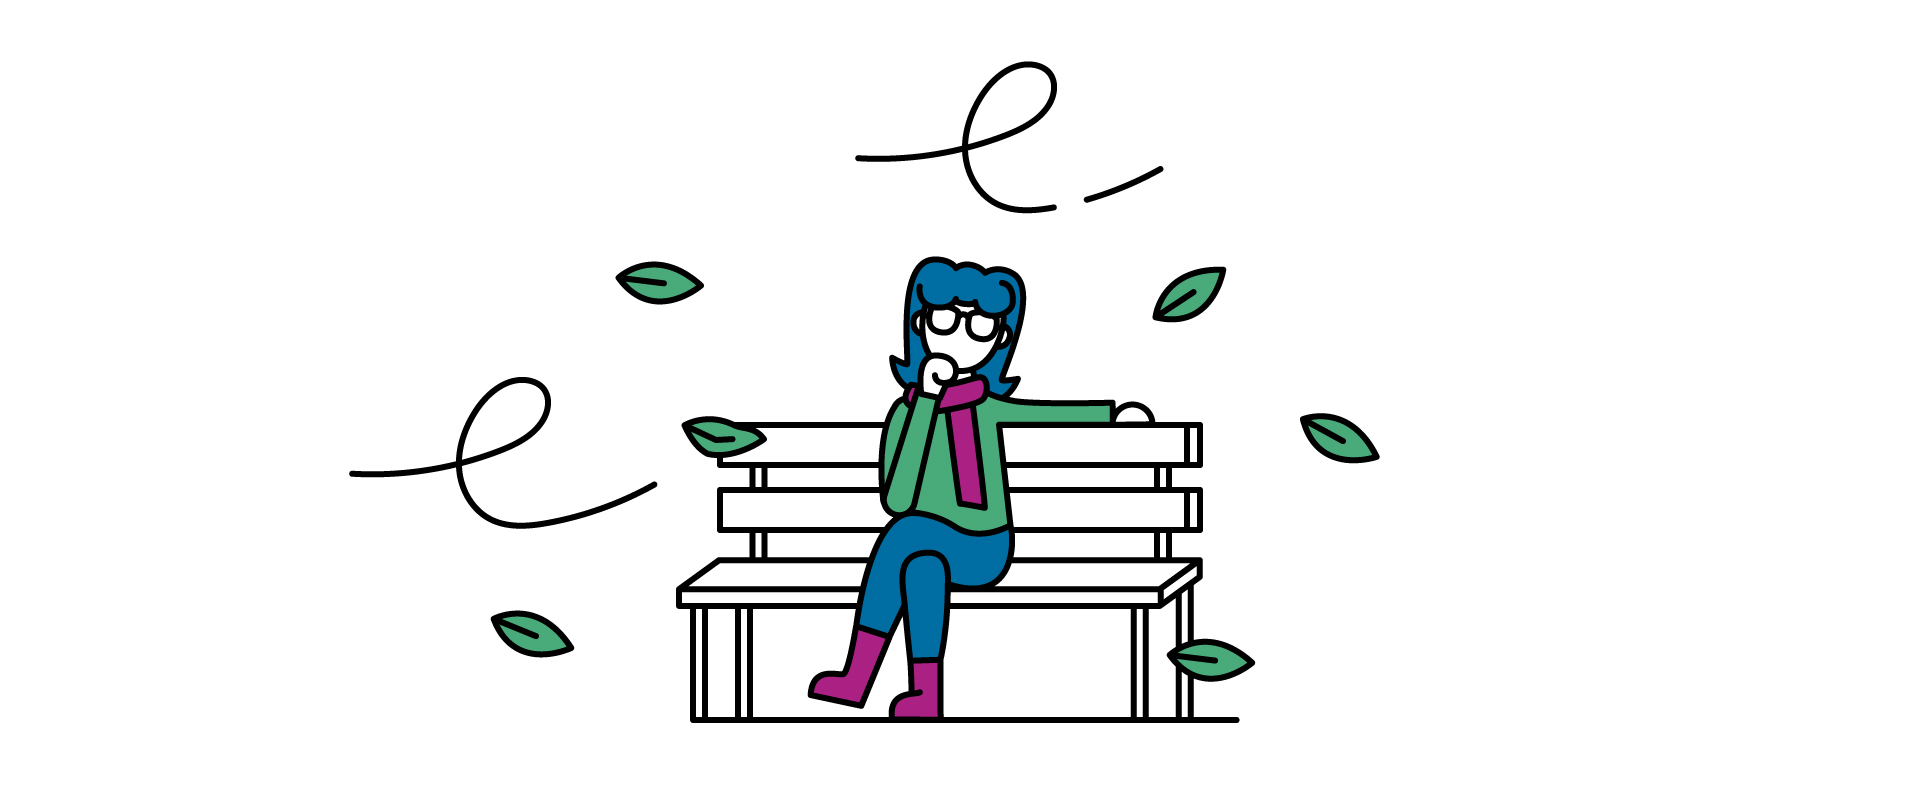 Illustration of a person taking time to reflect